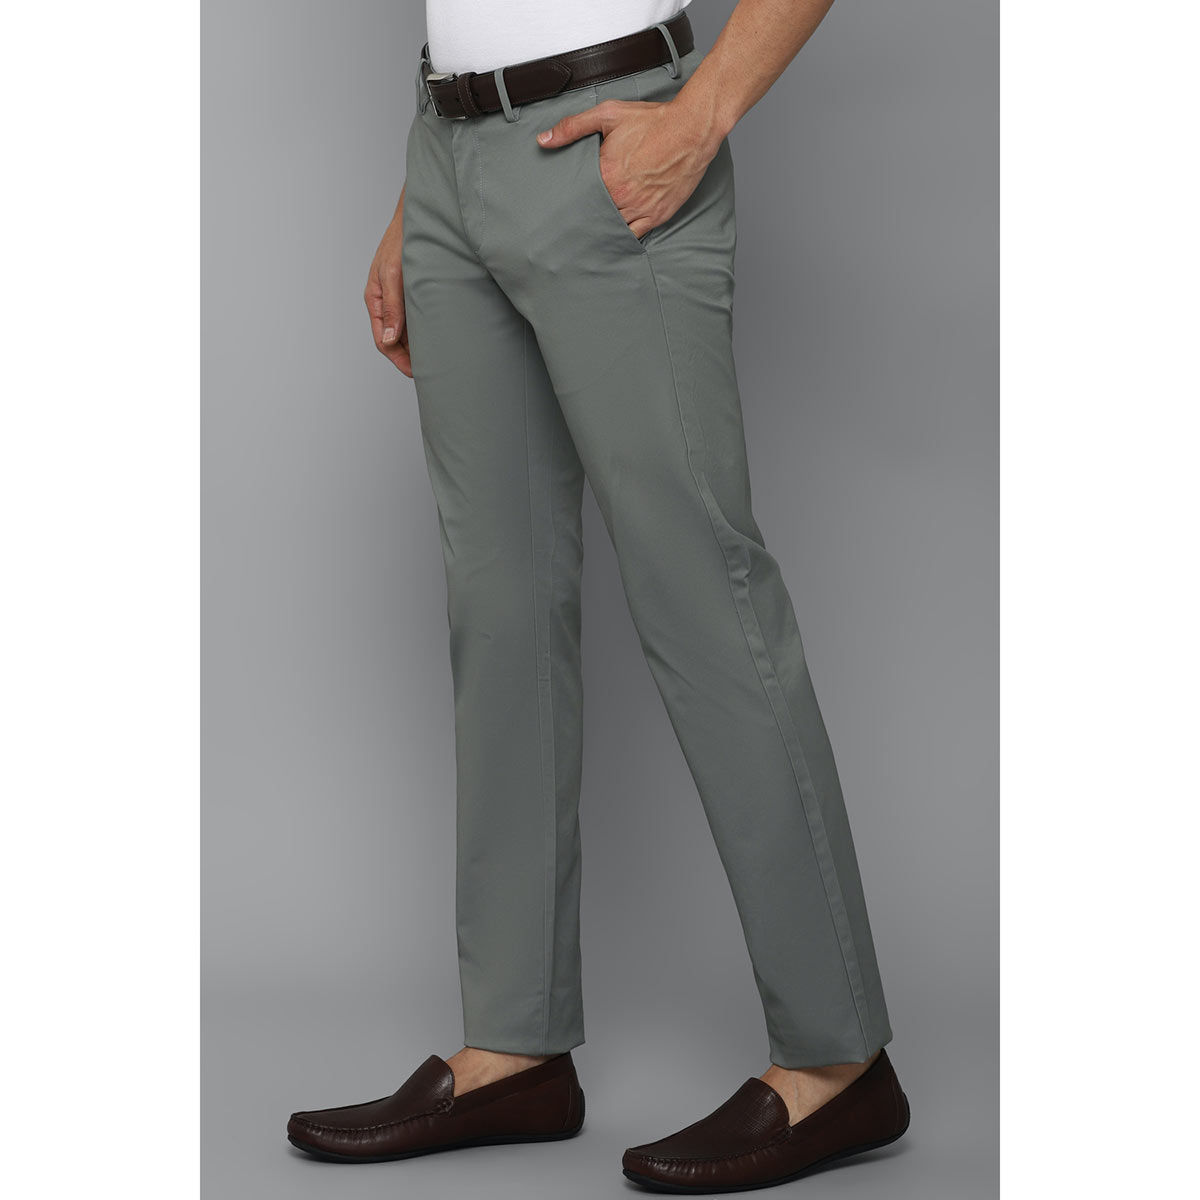 Buy Allen Solly Formal Trousers & Hight Waist Pants - Men | FASHIOLA INDIA